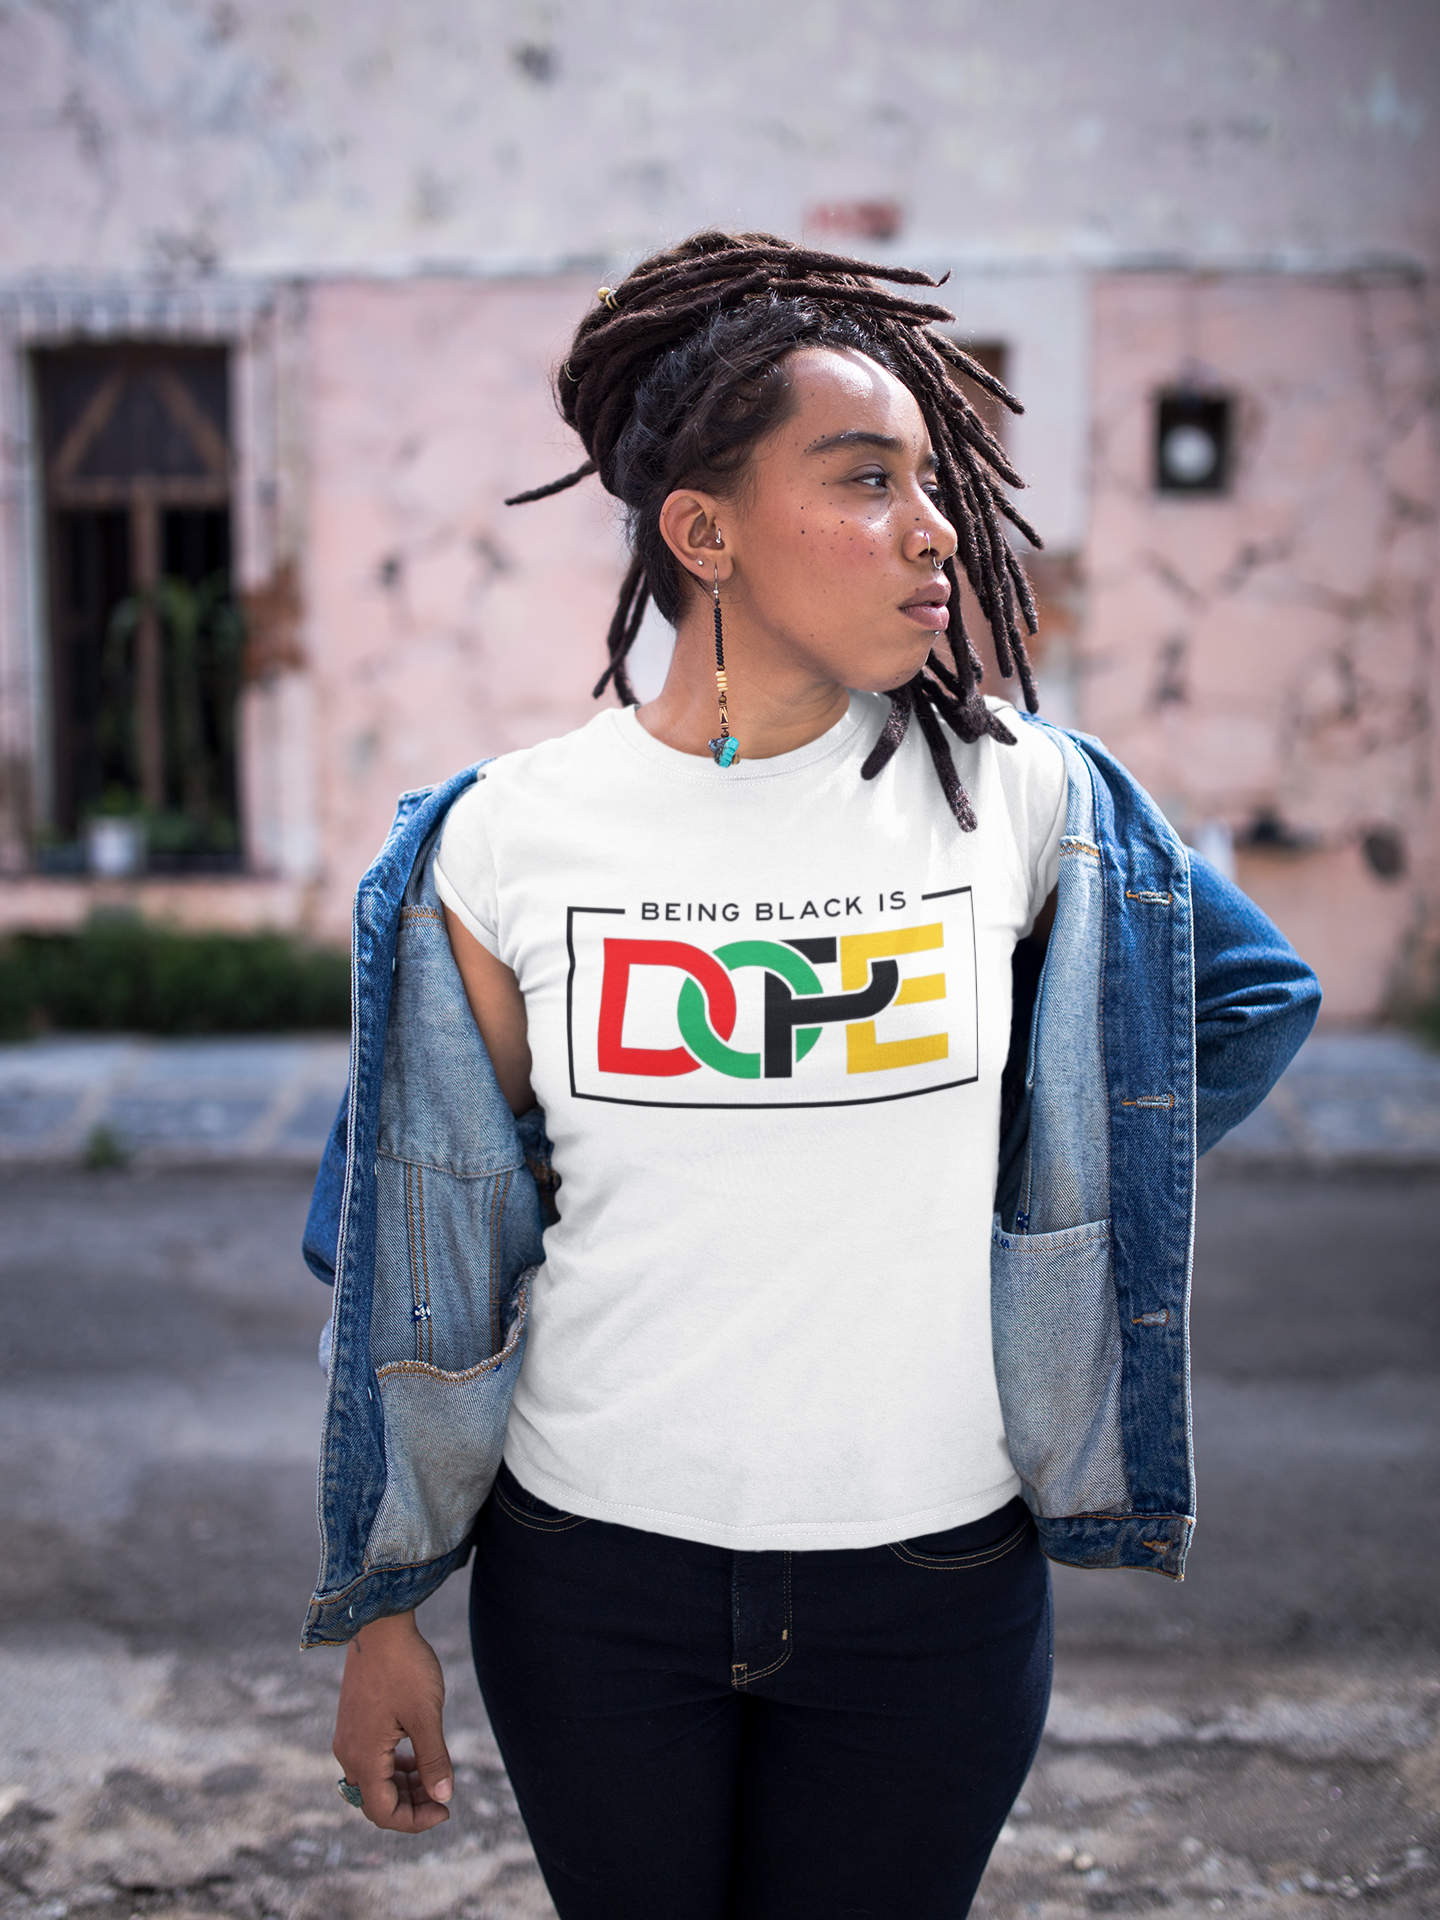 Black Girl with White T shirt text "Being Black is Dope"